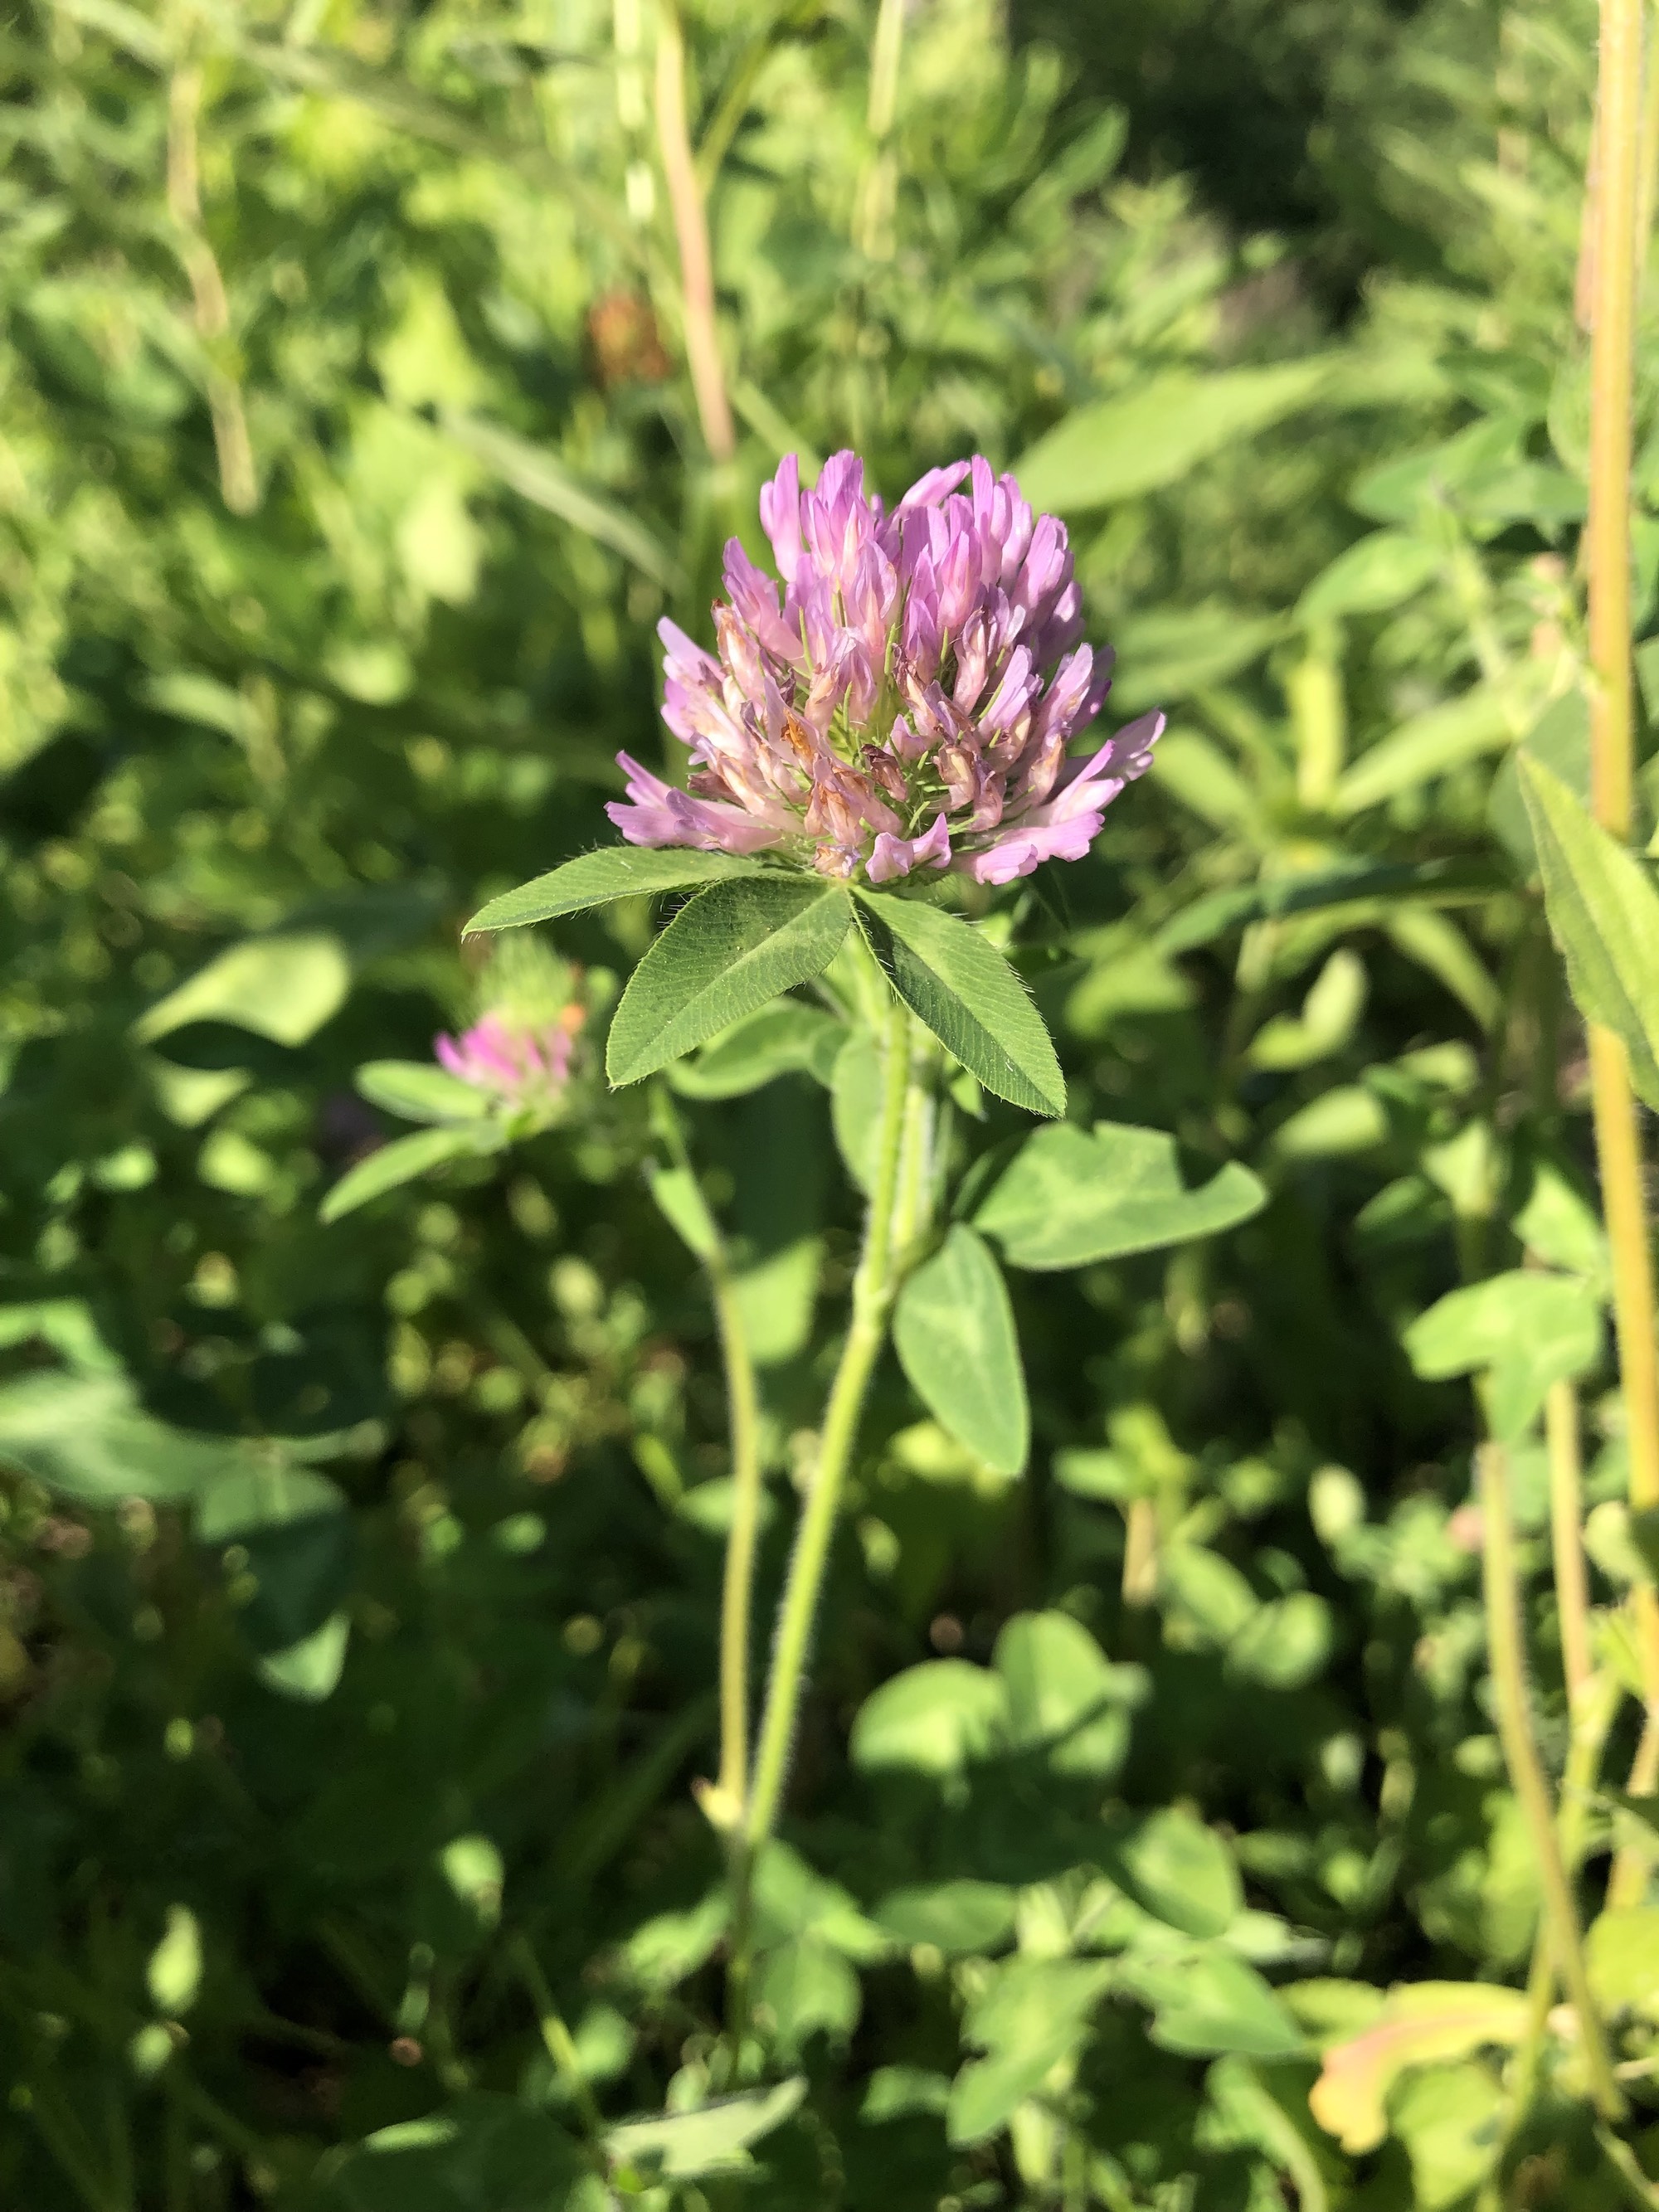 Red Clover in Marion Dunn Prairie in Madison, Wisconsin on June 16, 2021.